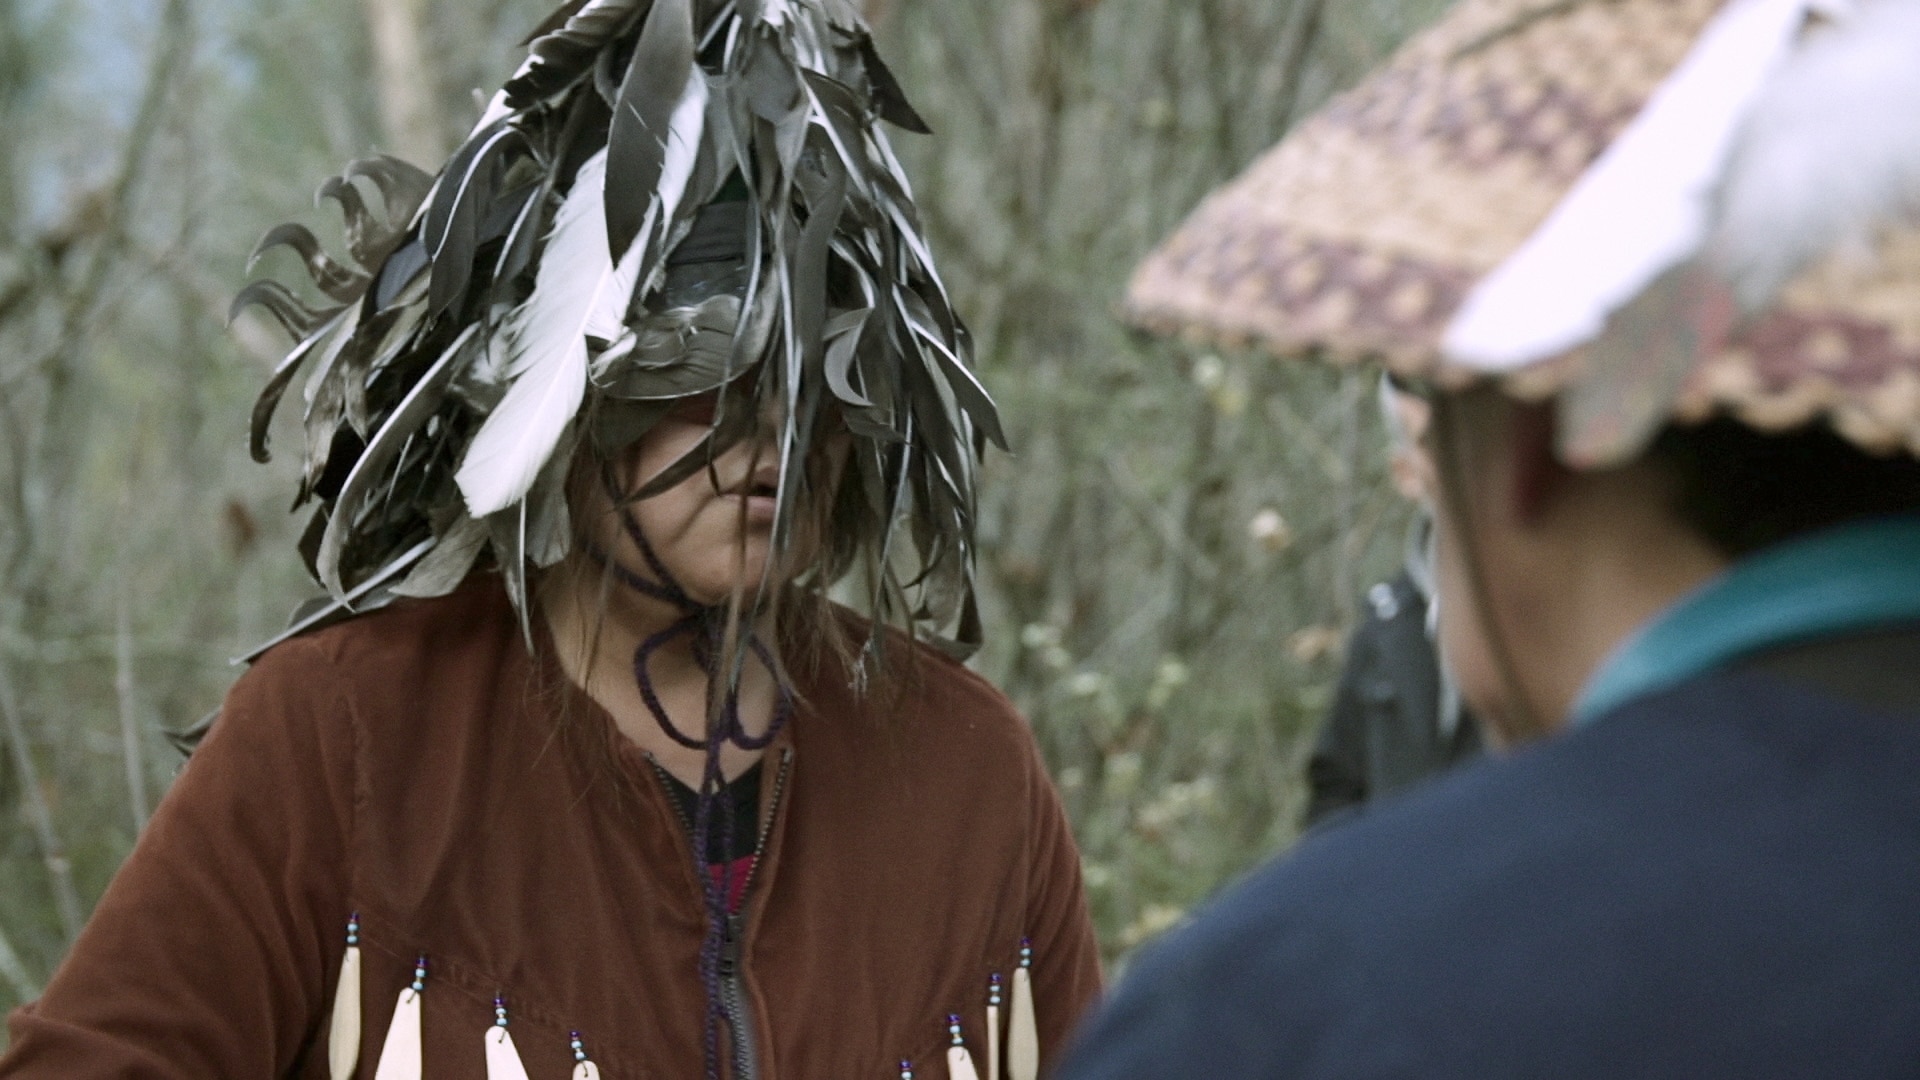 Still from the Caretakers